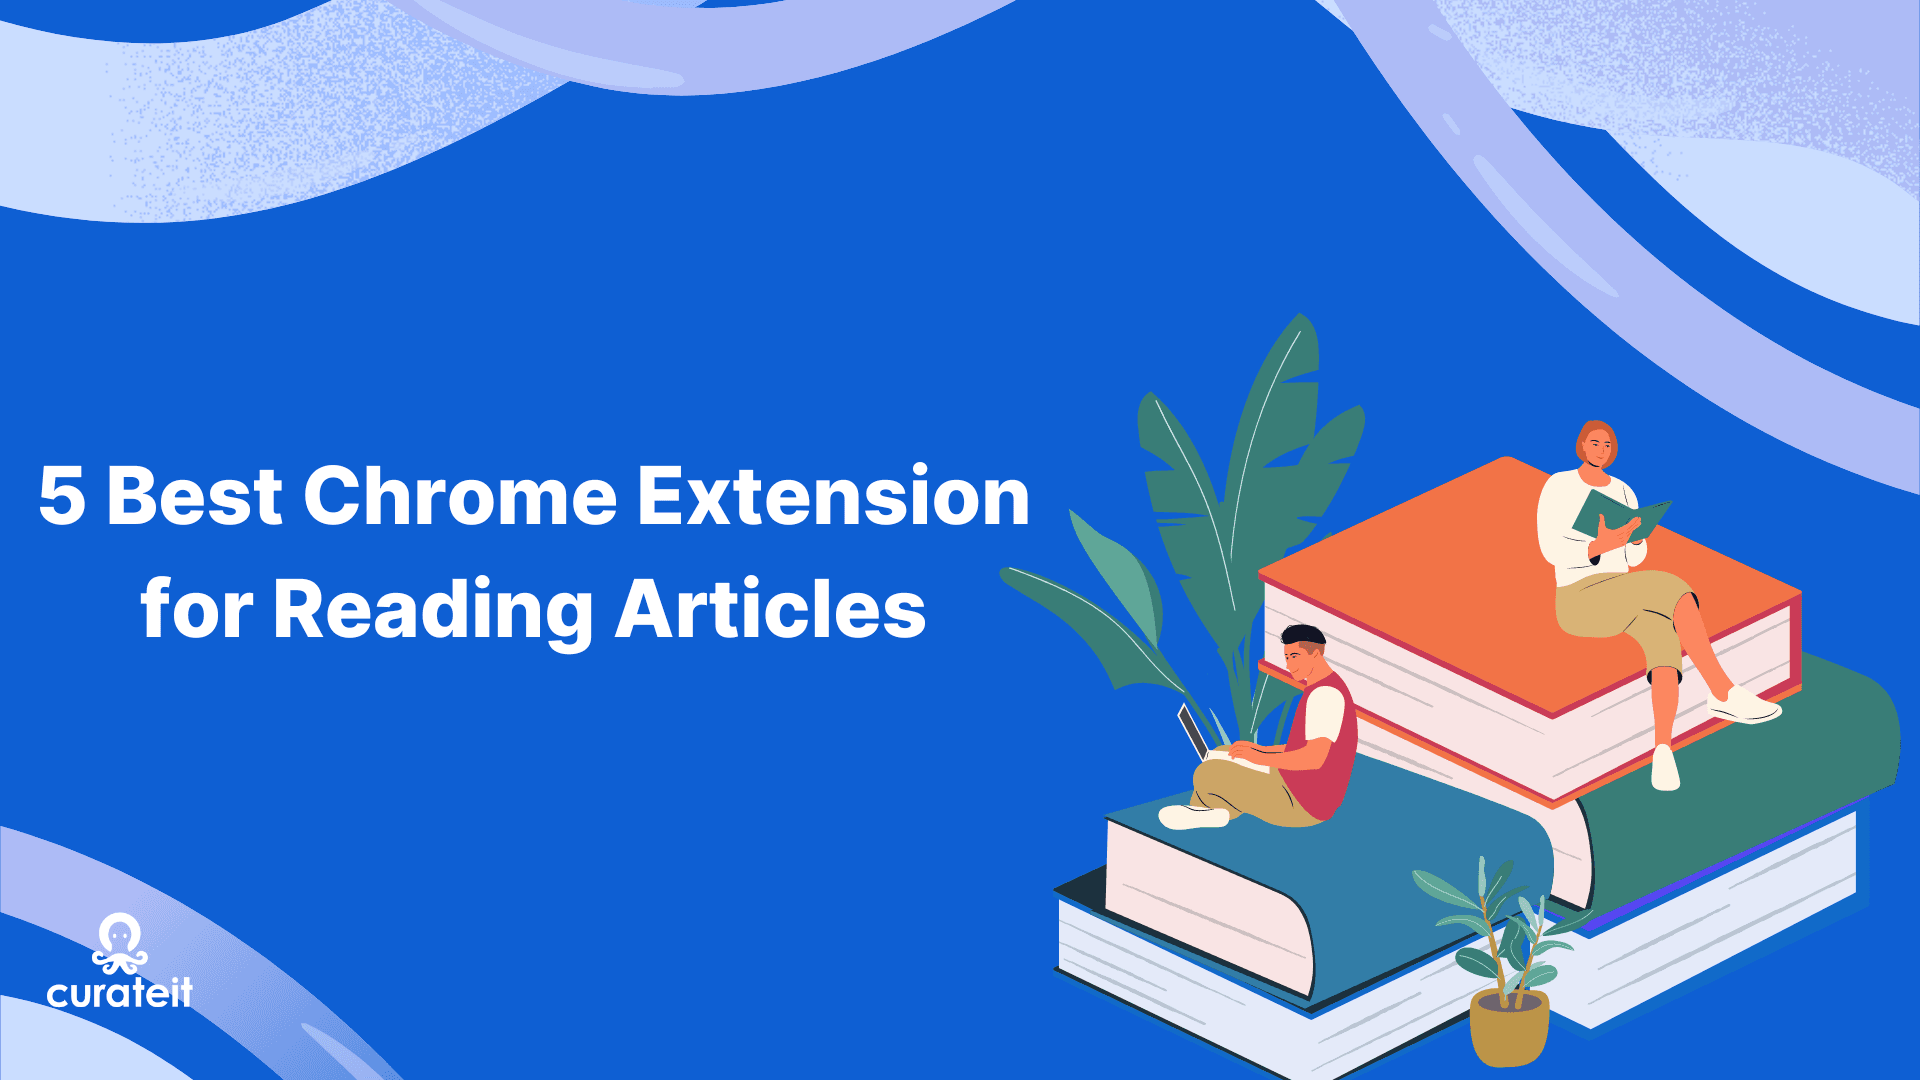 5 Best Chrome Extensions for Reading Articles with CurateIt